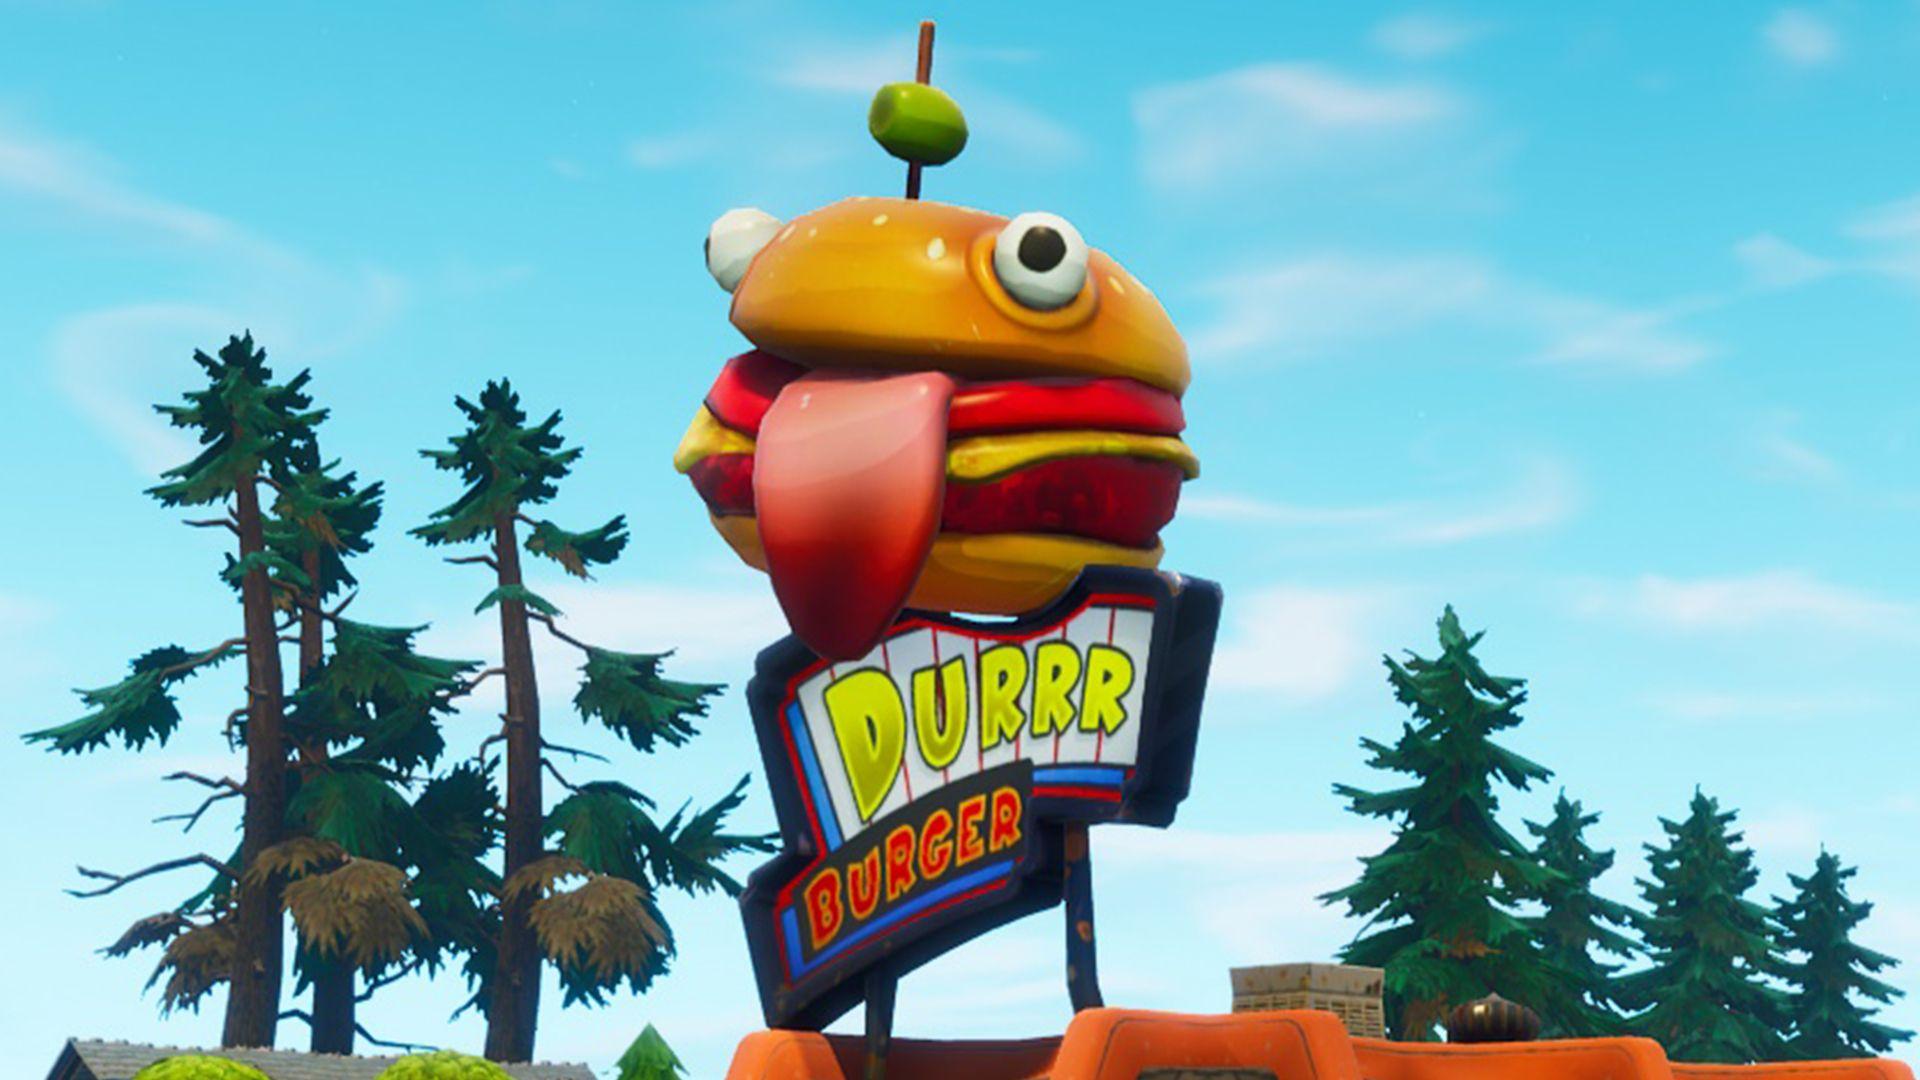 Fortnite's new skins include the Durr Burger, a sushi chef, and